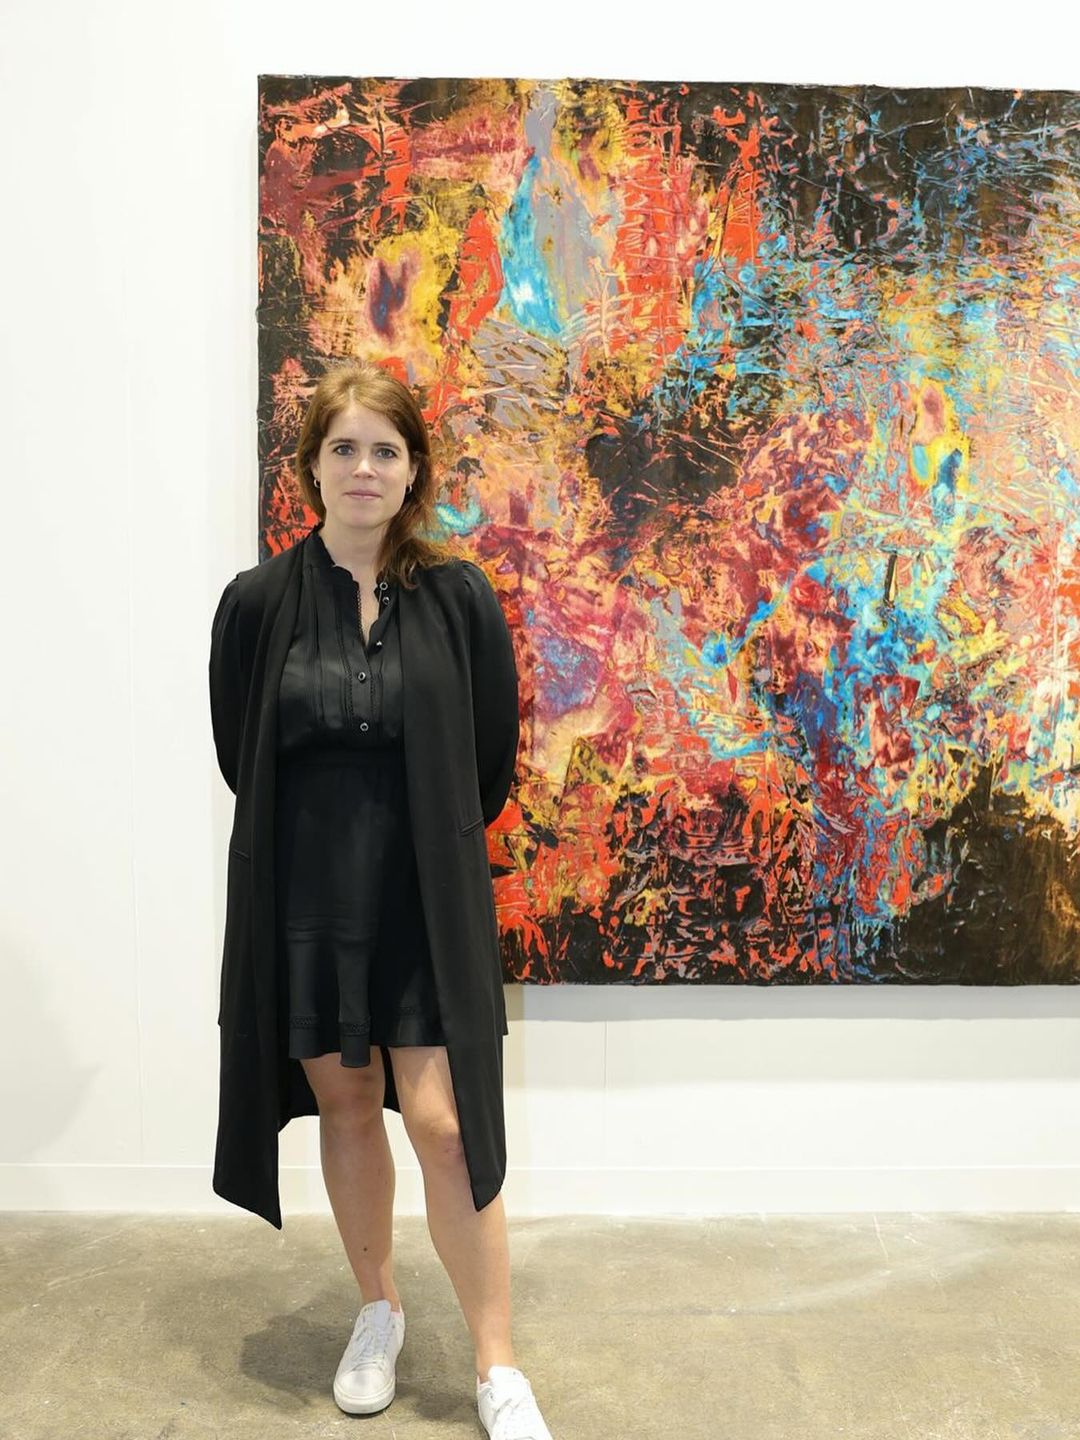 Princess Eugenie poses in a black dress in front of a creative painting